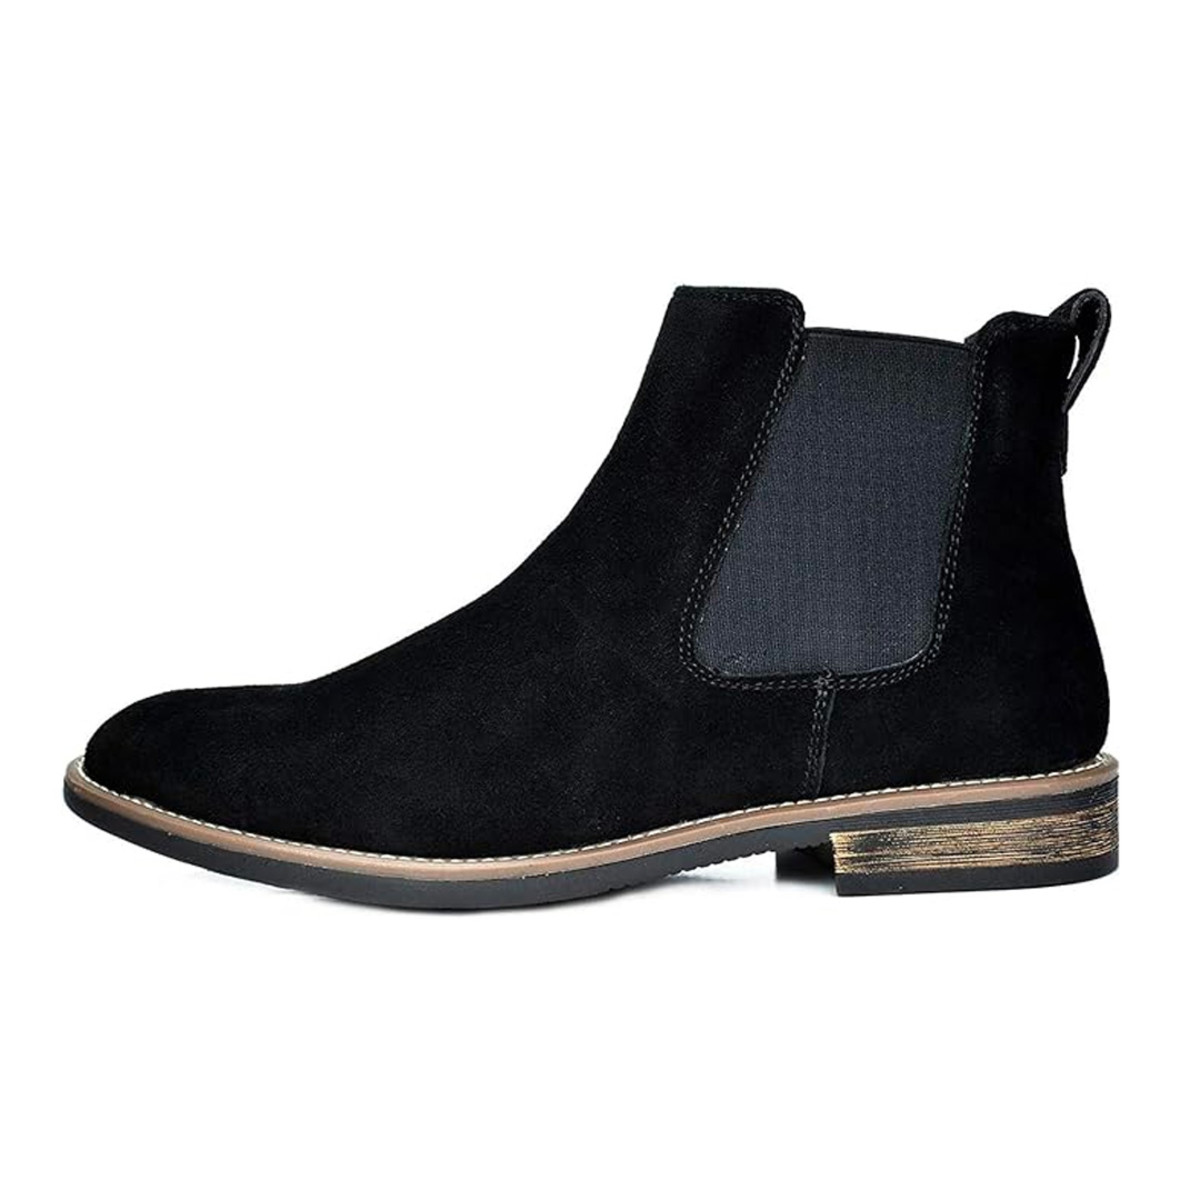 The Bruno Marc Men’s Chelsea Boots Are Under $40 on Amazon - Men's Journal